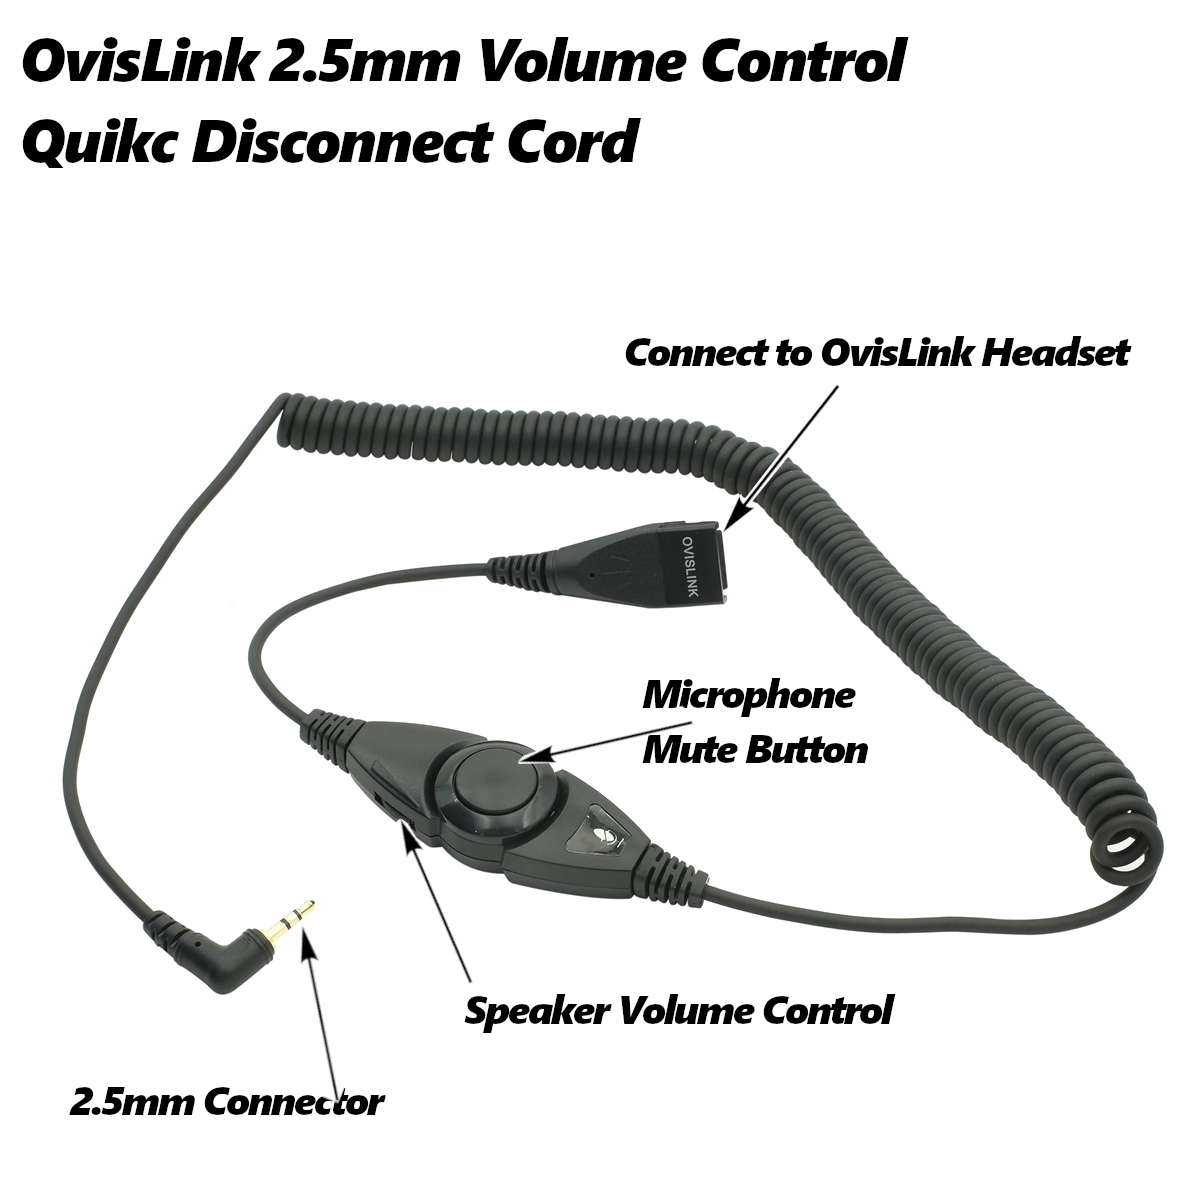 2.5mm quick disconnect cord with volume control and mute